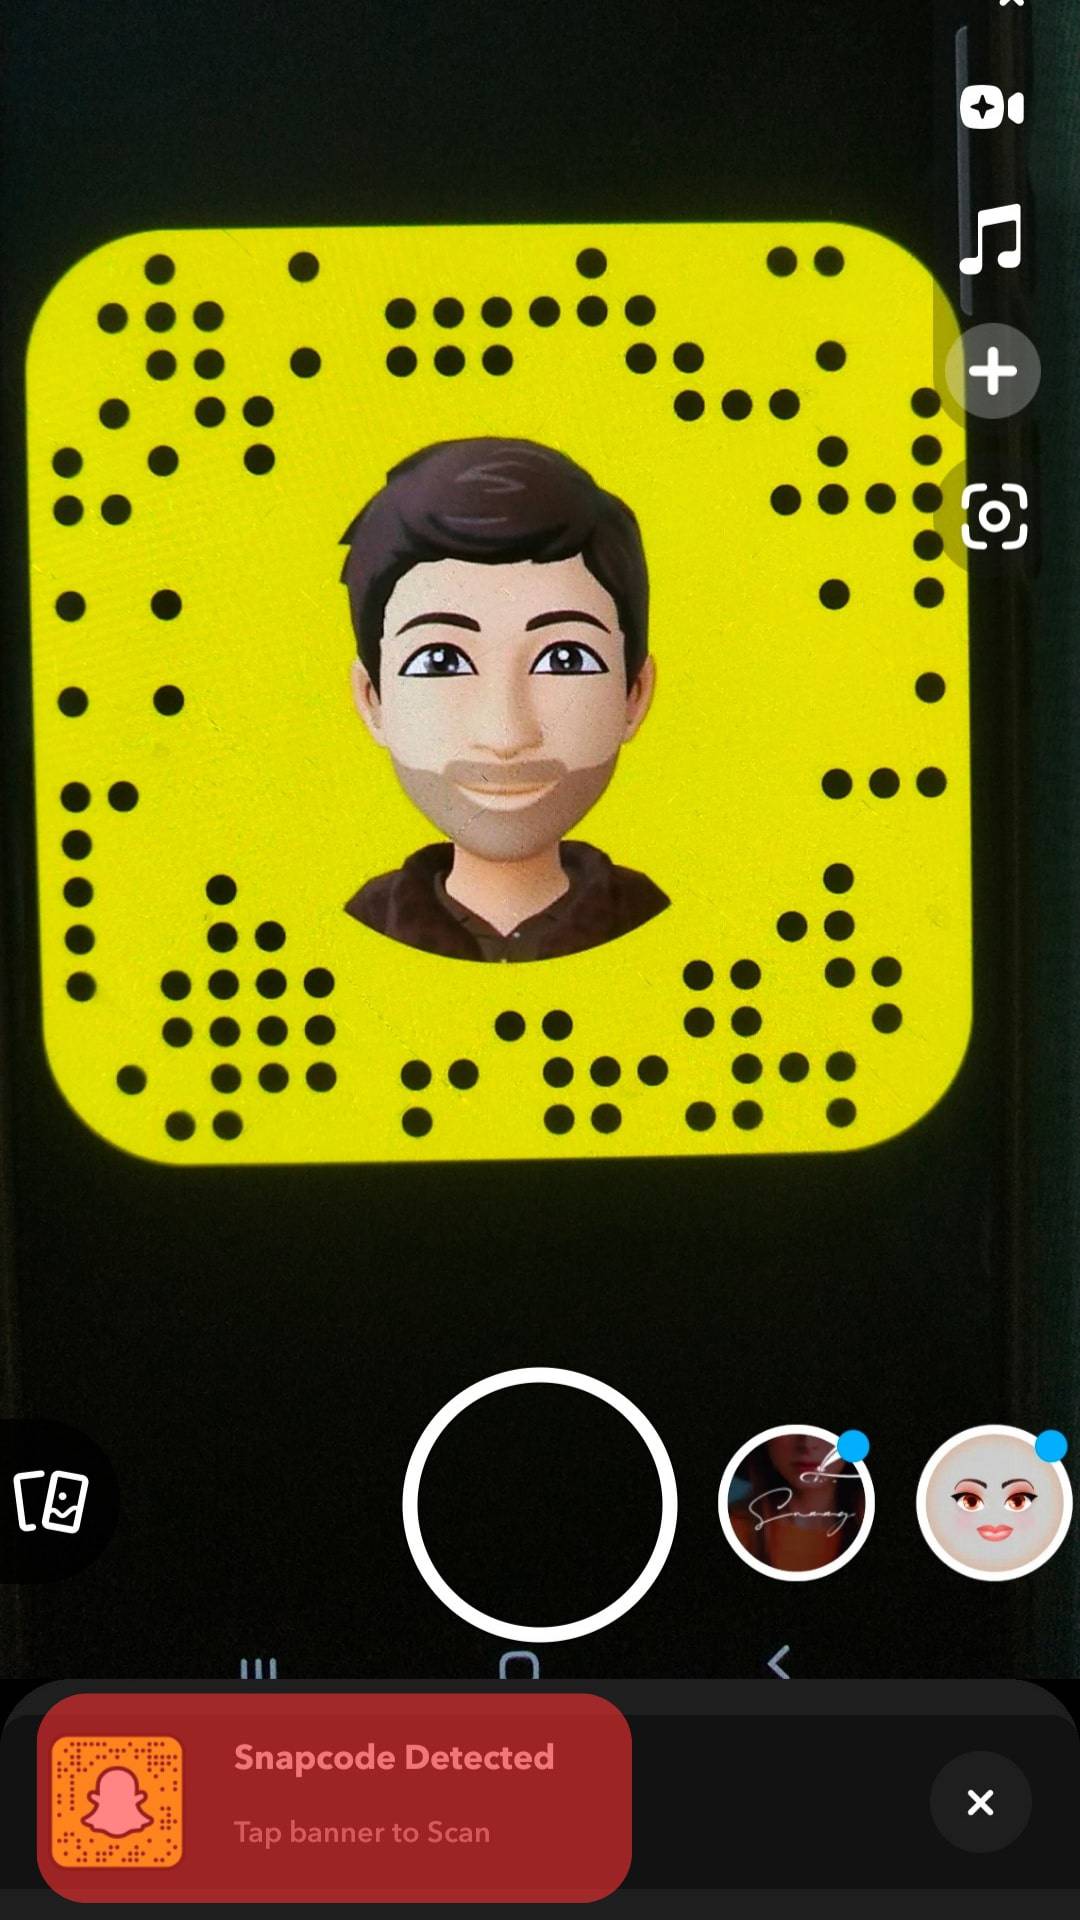 Place The Camera Over The Snapcode